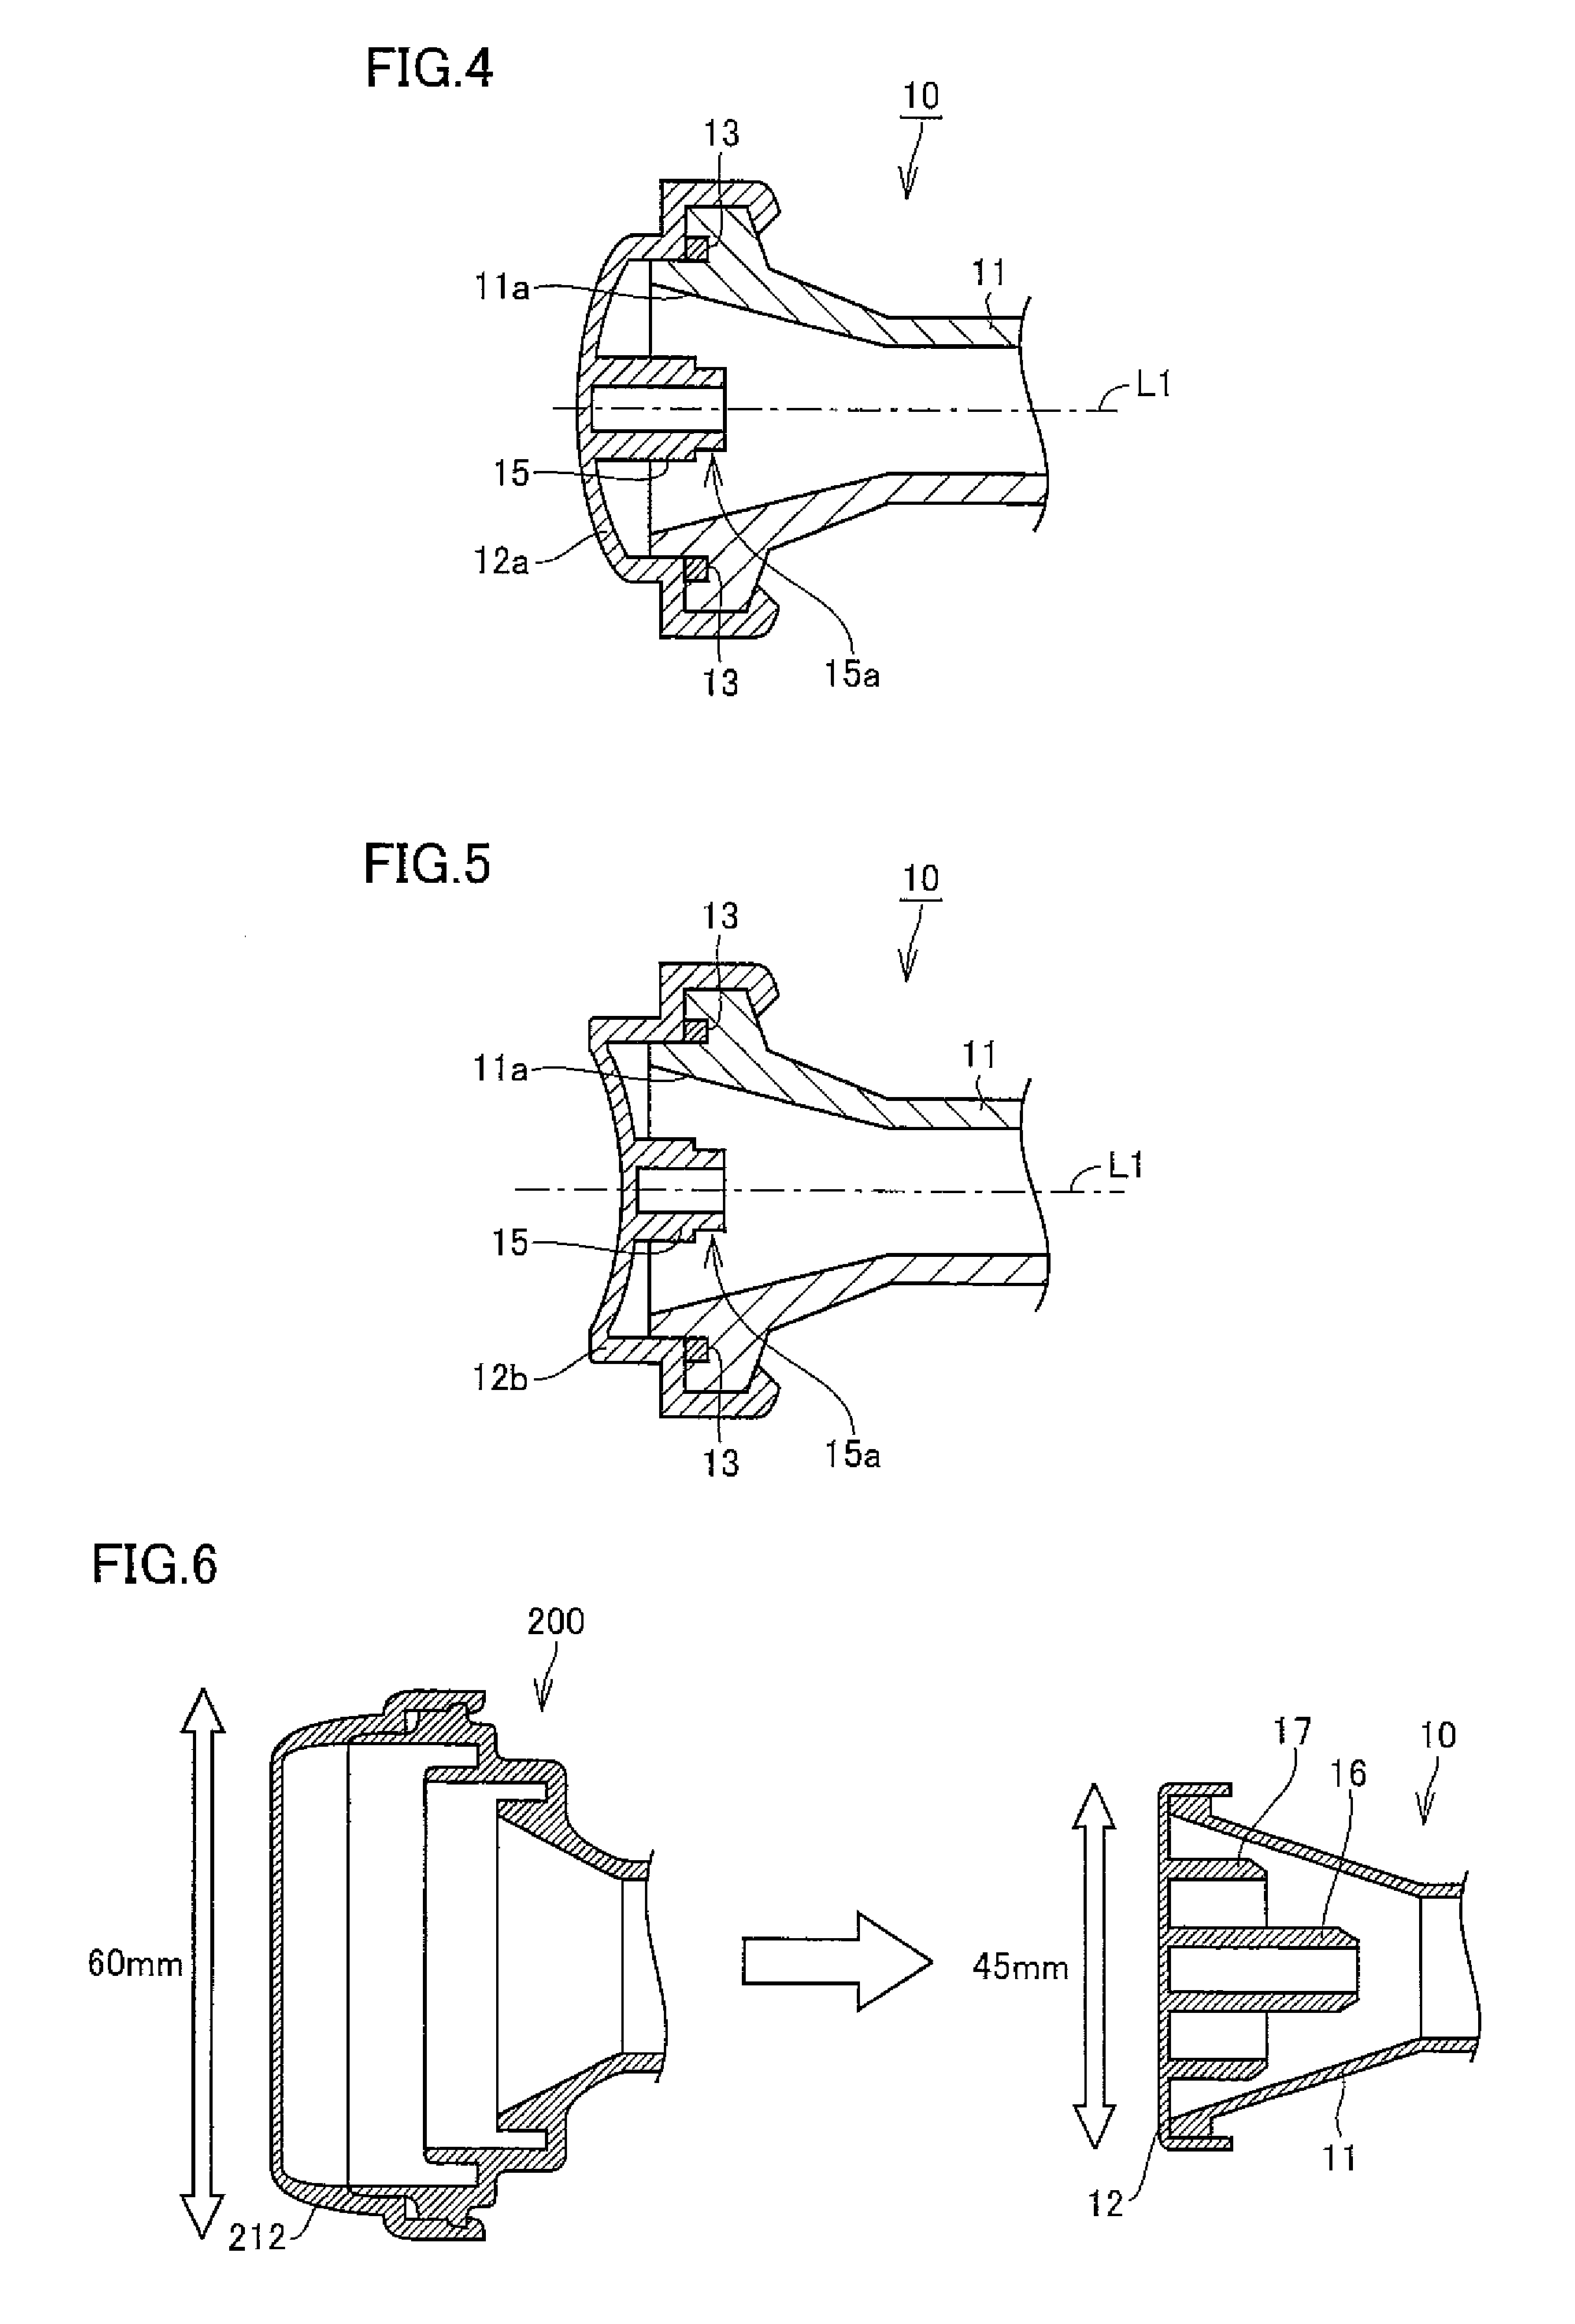 Primary radiator for parabolic antenna, low noise block down-converter, and parabolic antenna apparatus